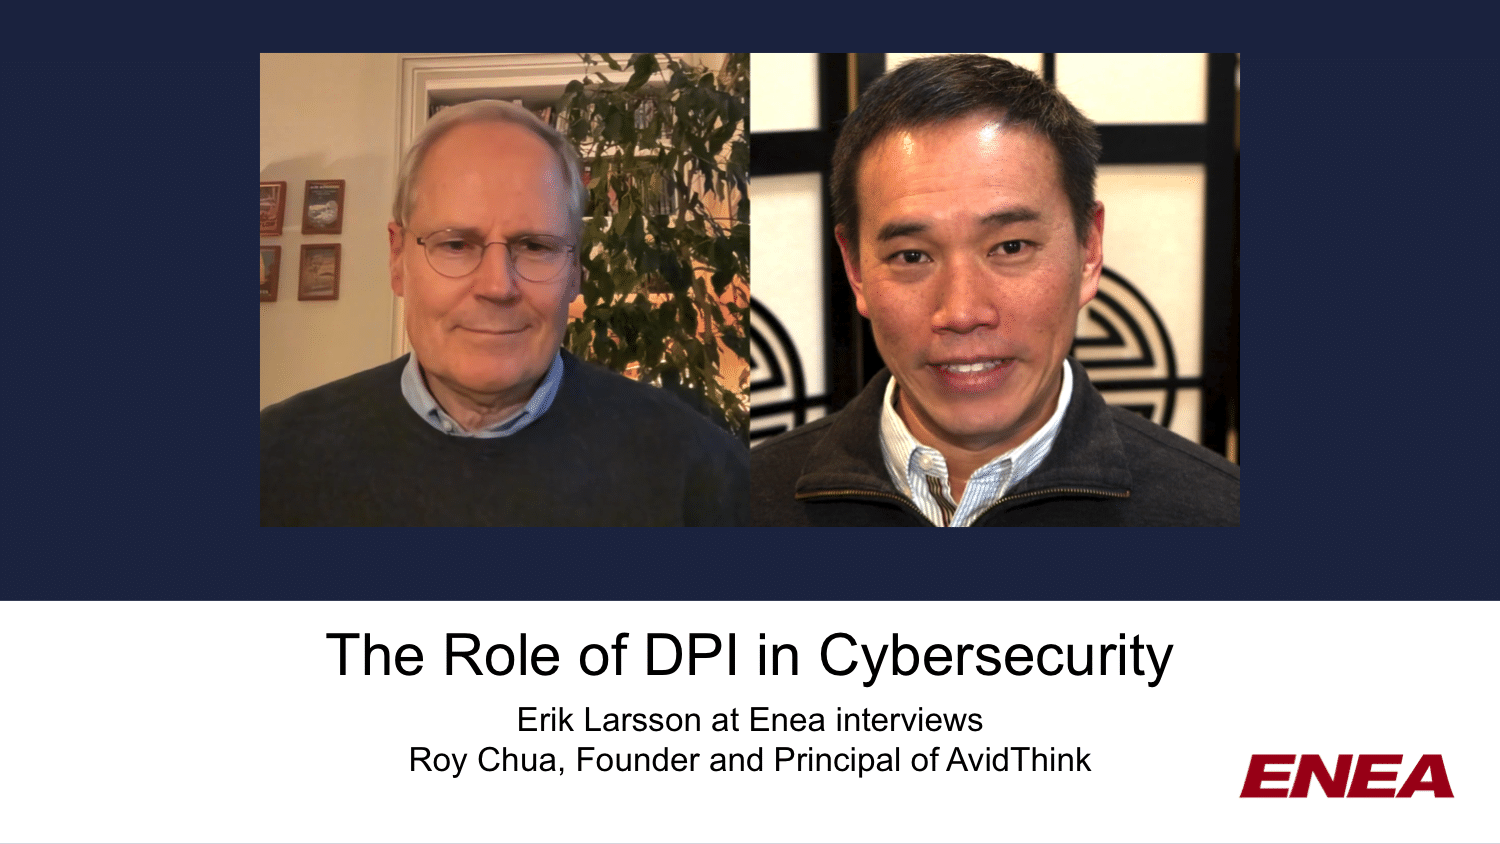 The Role of DPI in Cybersecurity - An Interview with Roy Chua, Founder and Principal of AvidThink